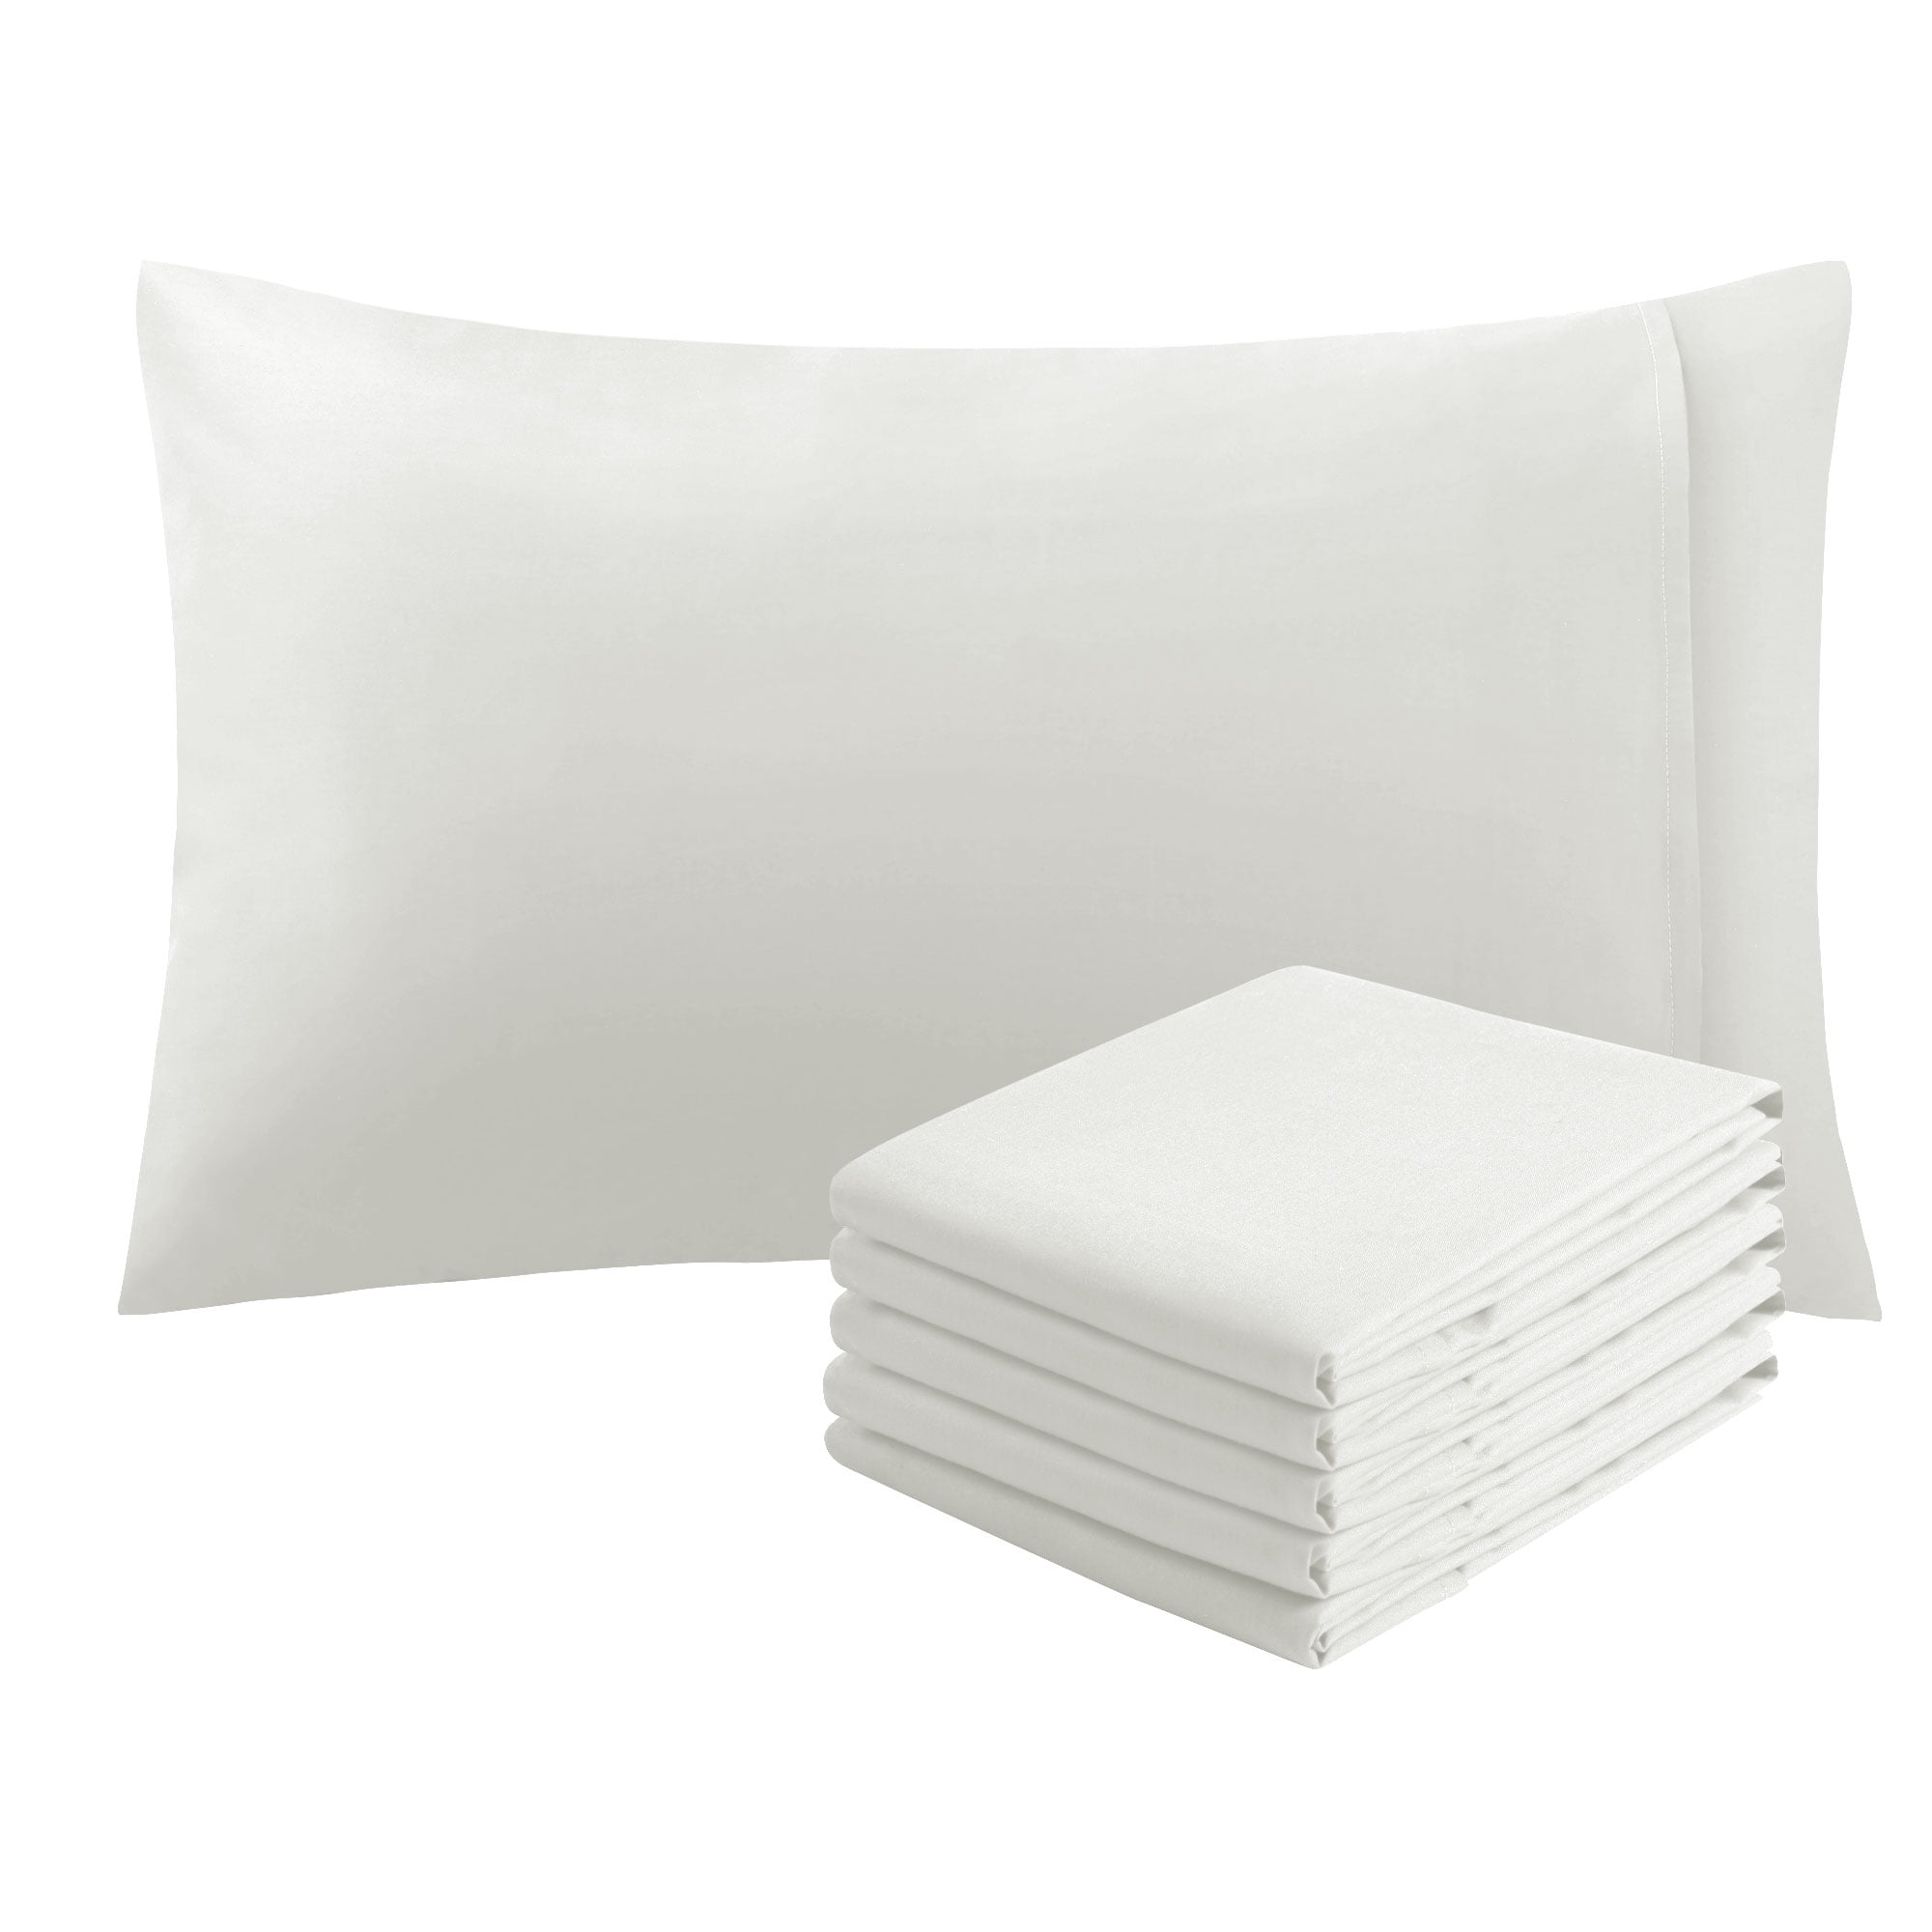 6 pack 20''x 30'' t200 standard pillow cases  hotel grade matches our sheets 